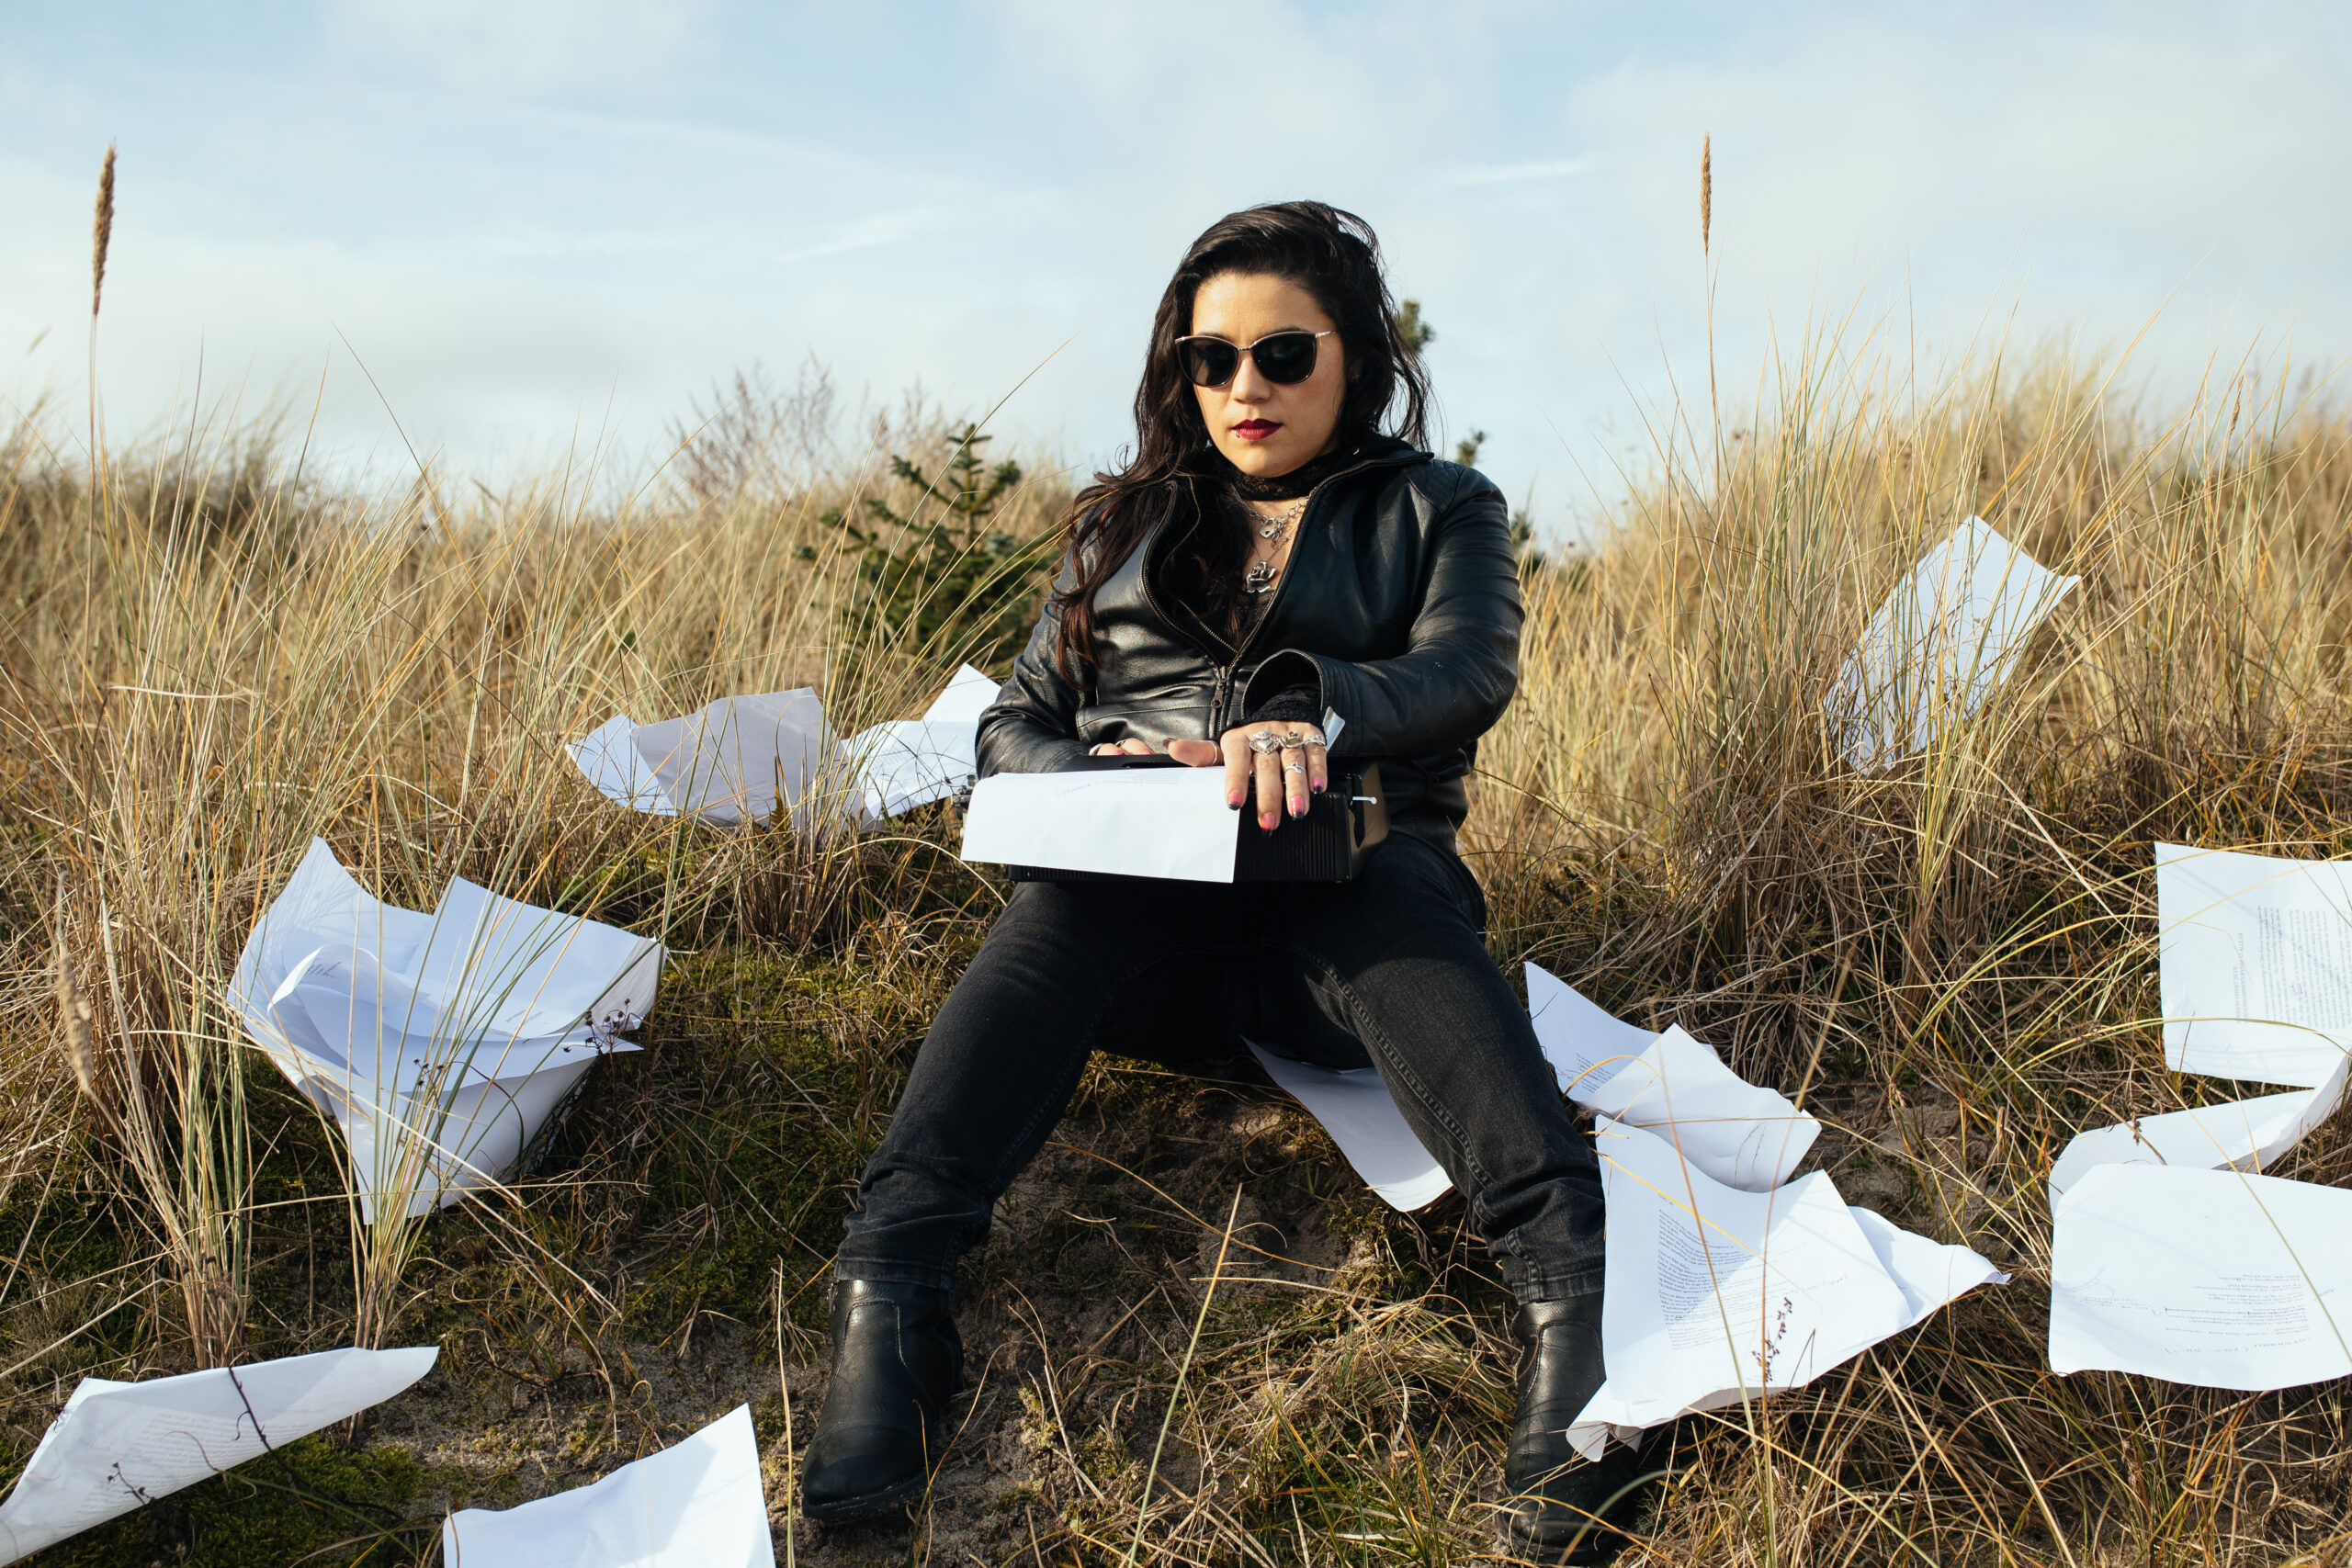 Elizabeth Torres sitting in tall grass with papers strown about her.